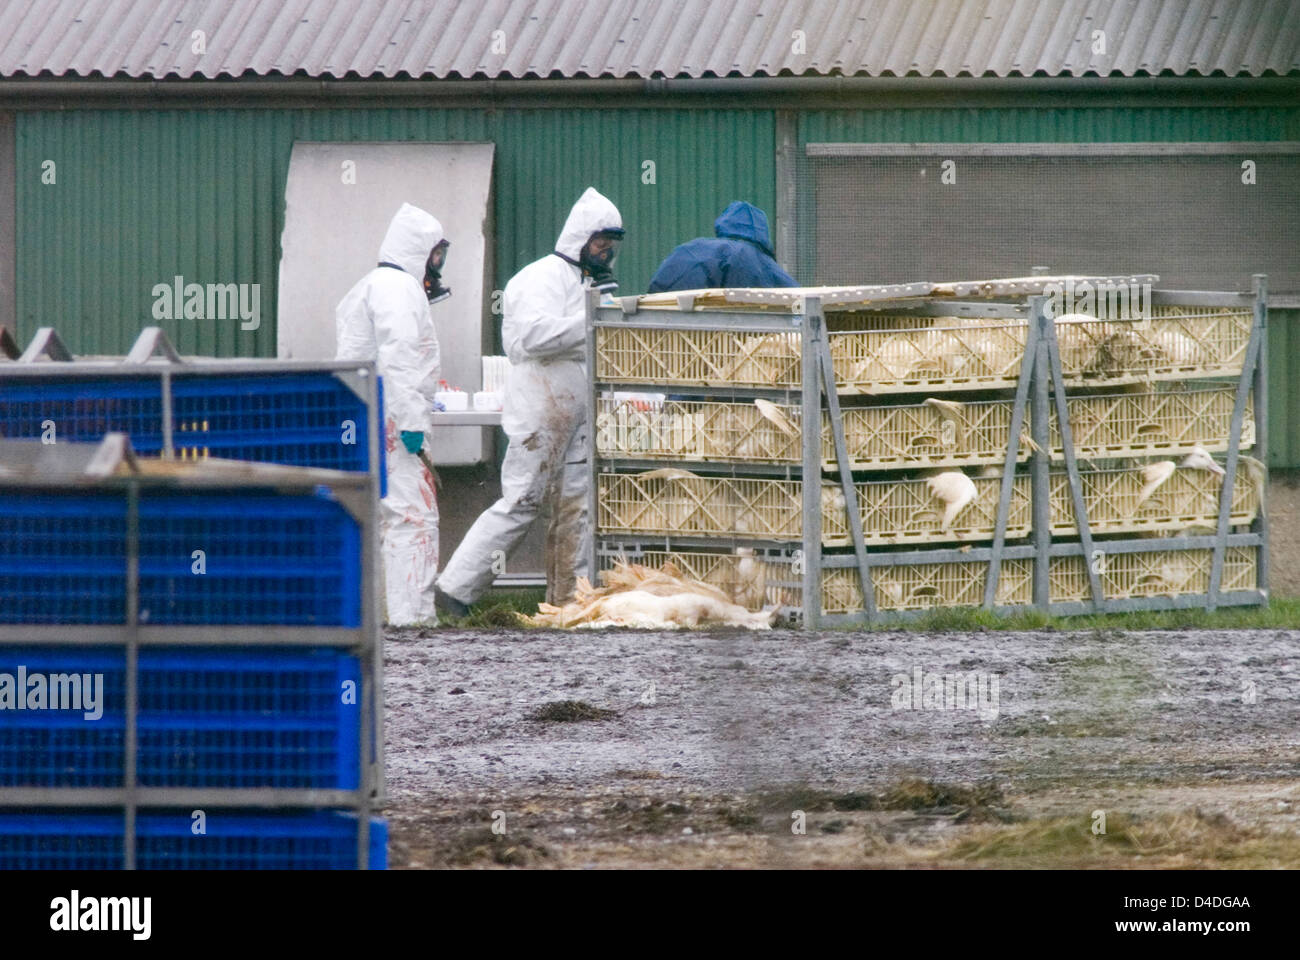 Bird Flu Outbreak in Suffolk, The Grange Farm, Redgrave, Poultry being culled as a precautionary measure against further spread Stock Photo